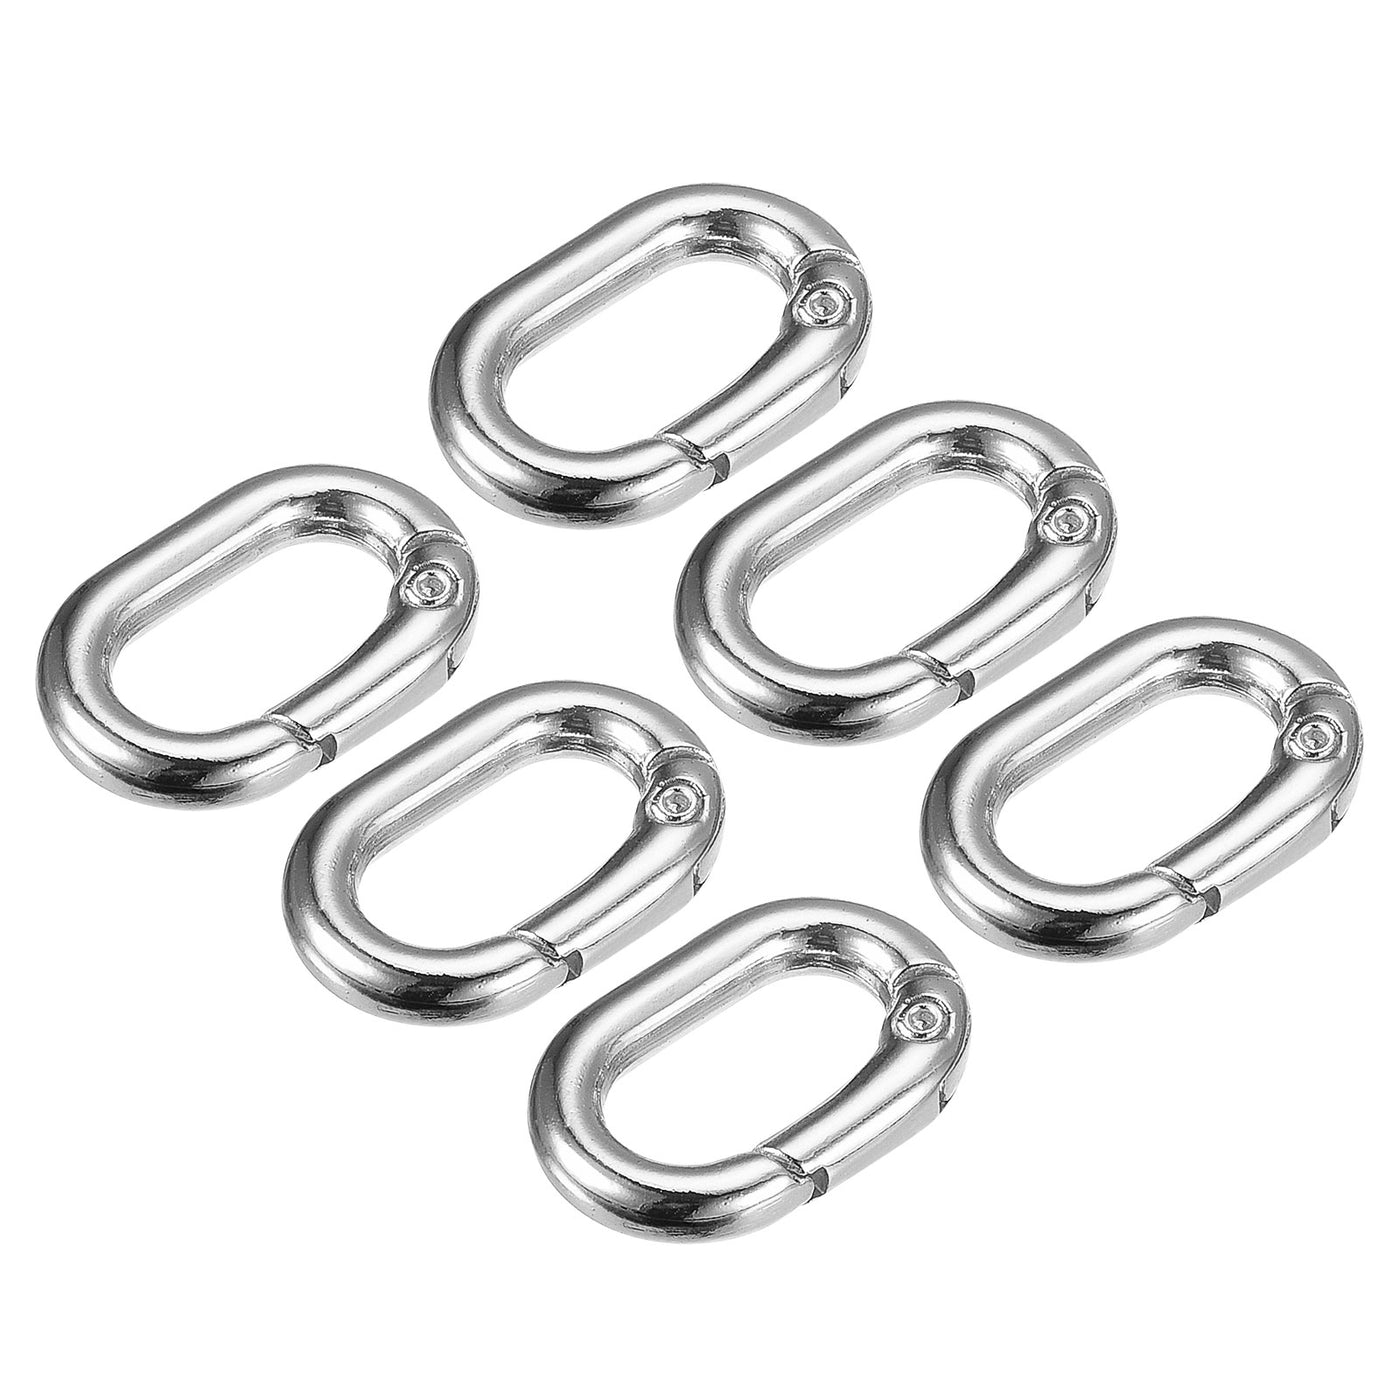 uxcell Uxcell 0.83" Spring Oval Ring Snap Clip Trigger for Bag Purse Keychain, 6Pcs Silver